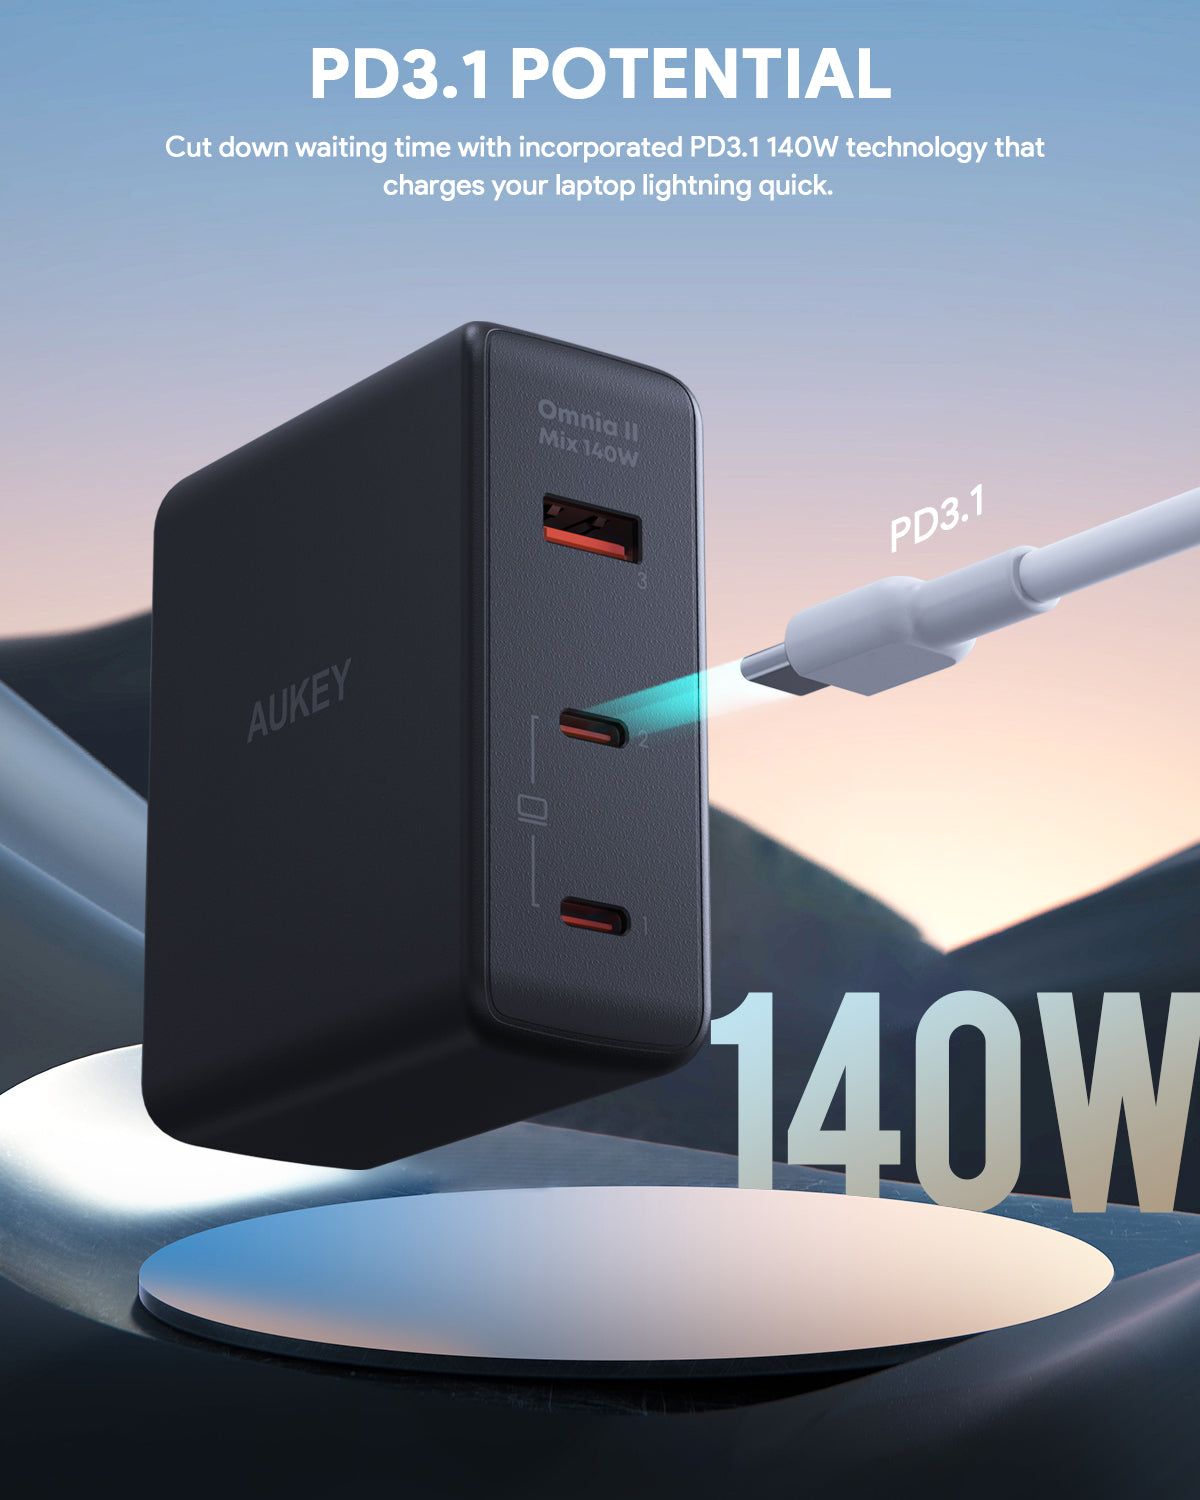 AUKEY Omnia II Mix 140W Wall Charger